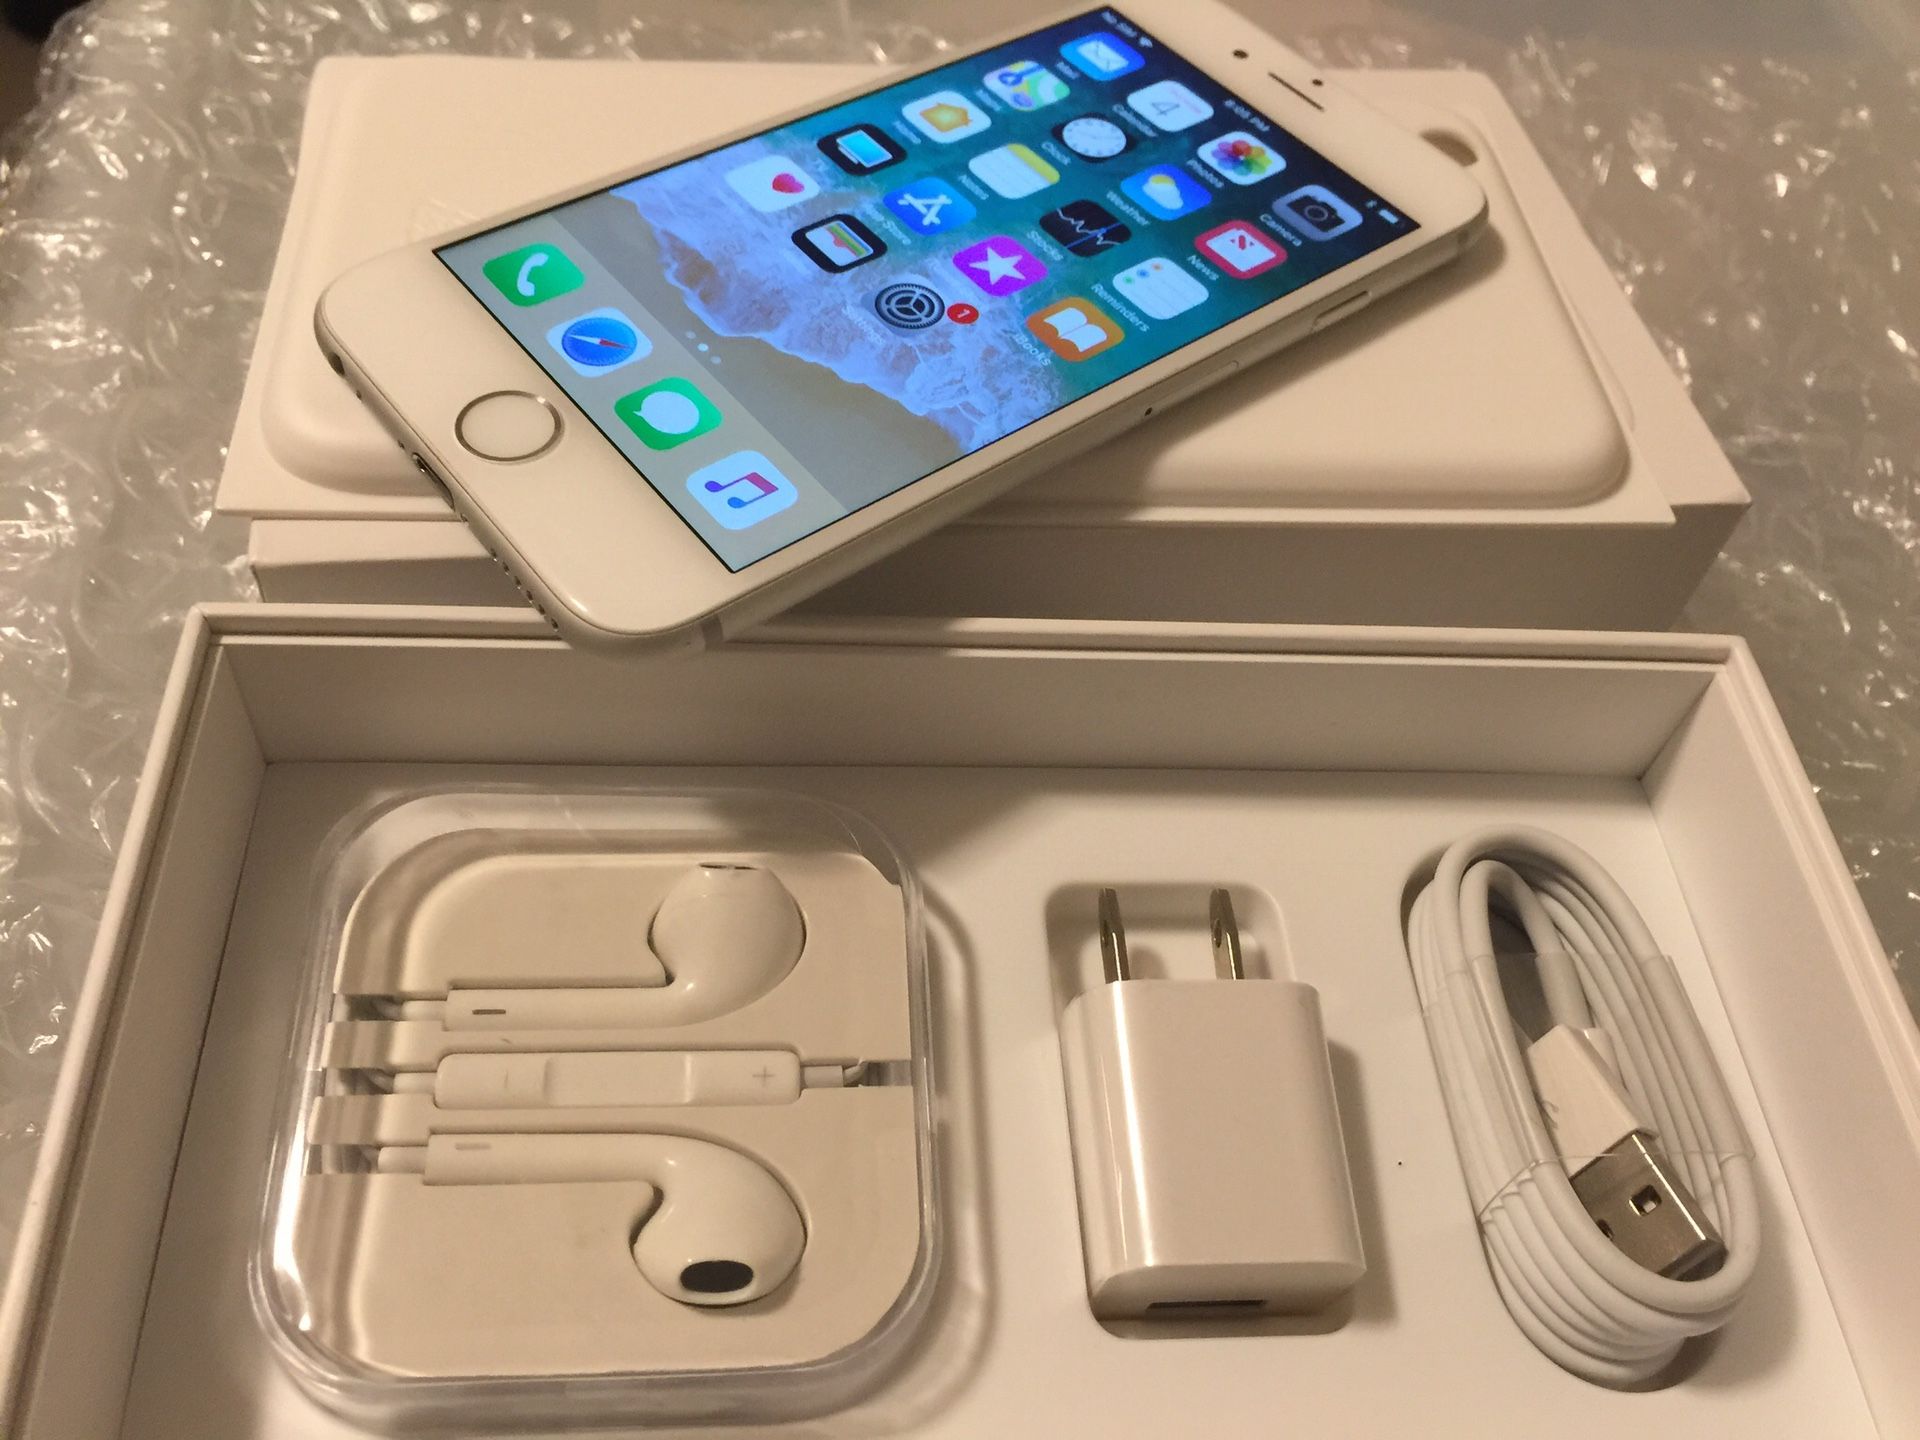 iPhone 6,64 GB, excellent condition factory unlocked